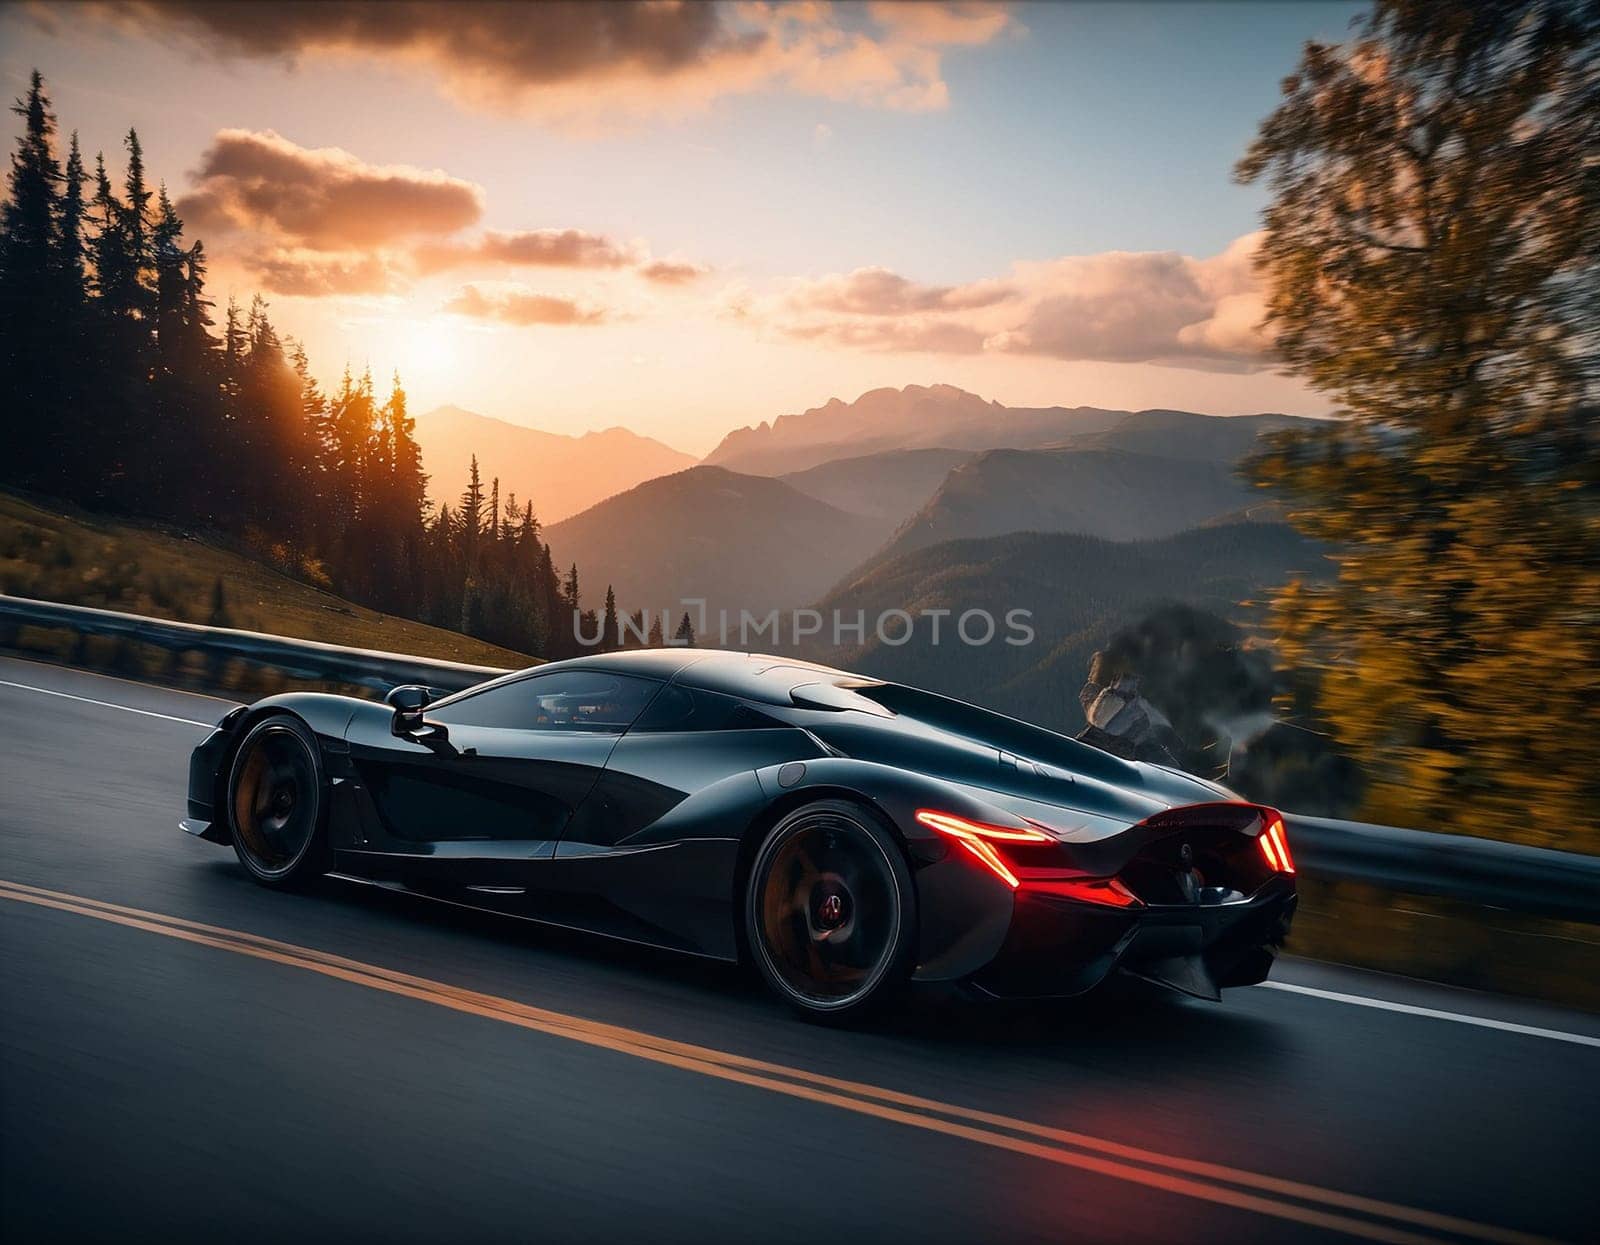 A sports car in the mountains.Sunset. High quality illustration